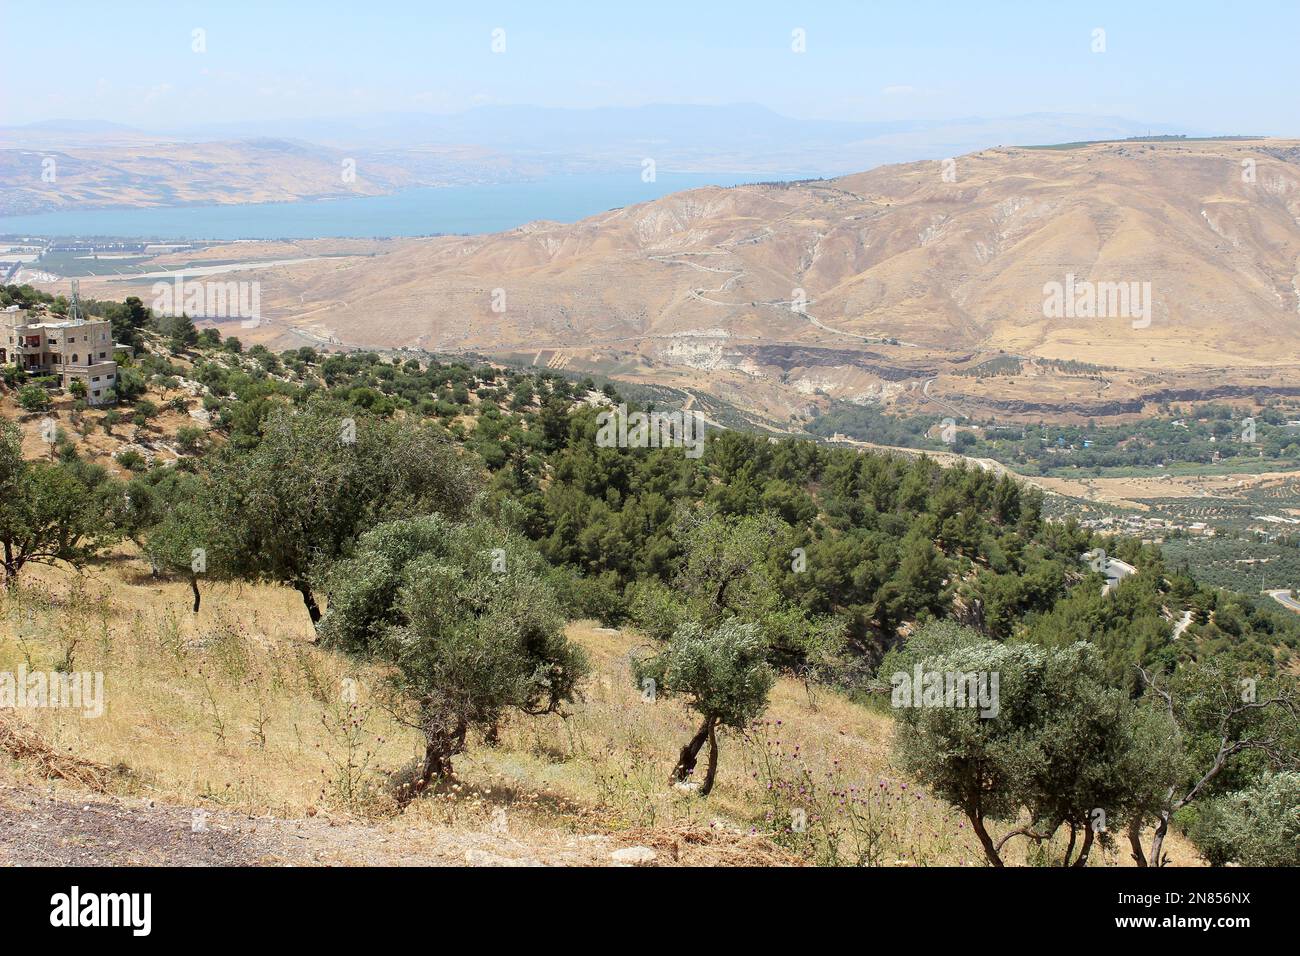 View over the Yarmouk Nature Reserve and the Golan Heights Towards Sea Of Galilee / Lake Tiberias from Umm Qais town, Jordan, Middle East Stock Photo